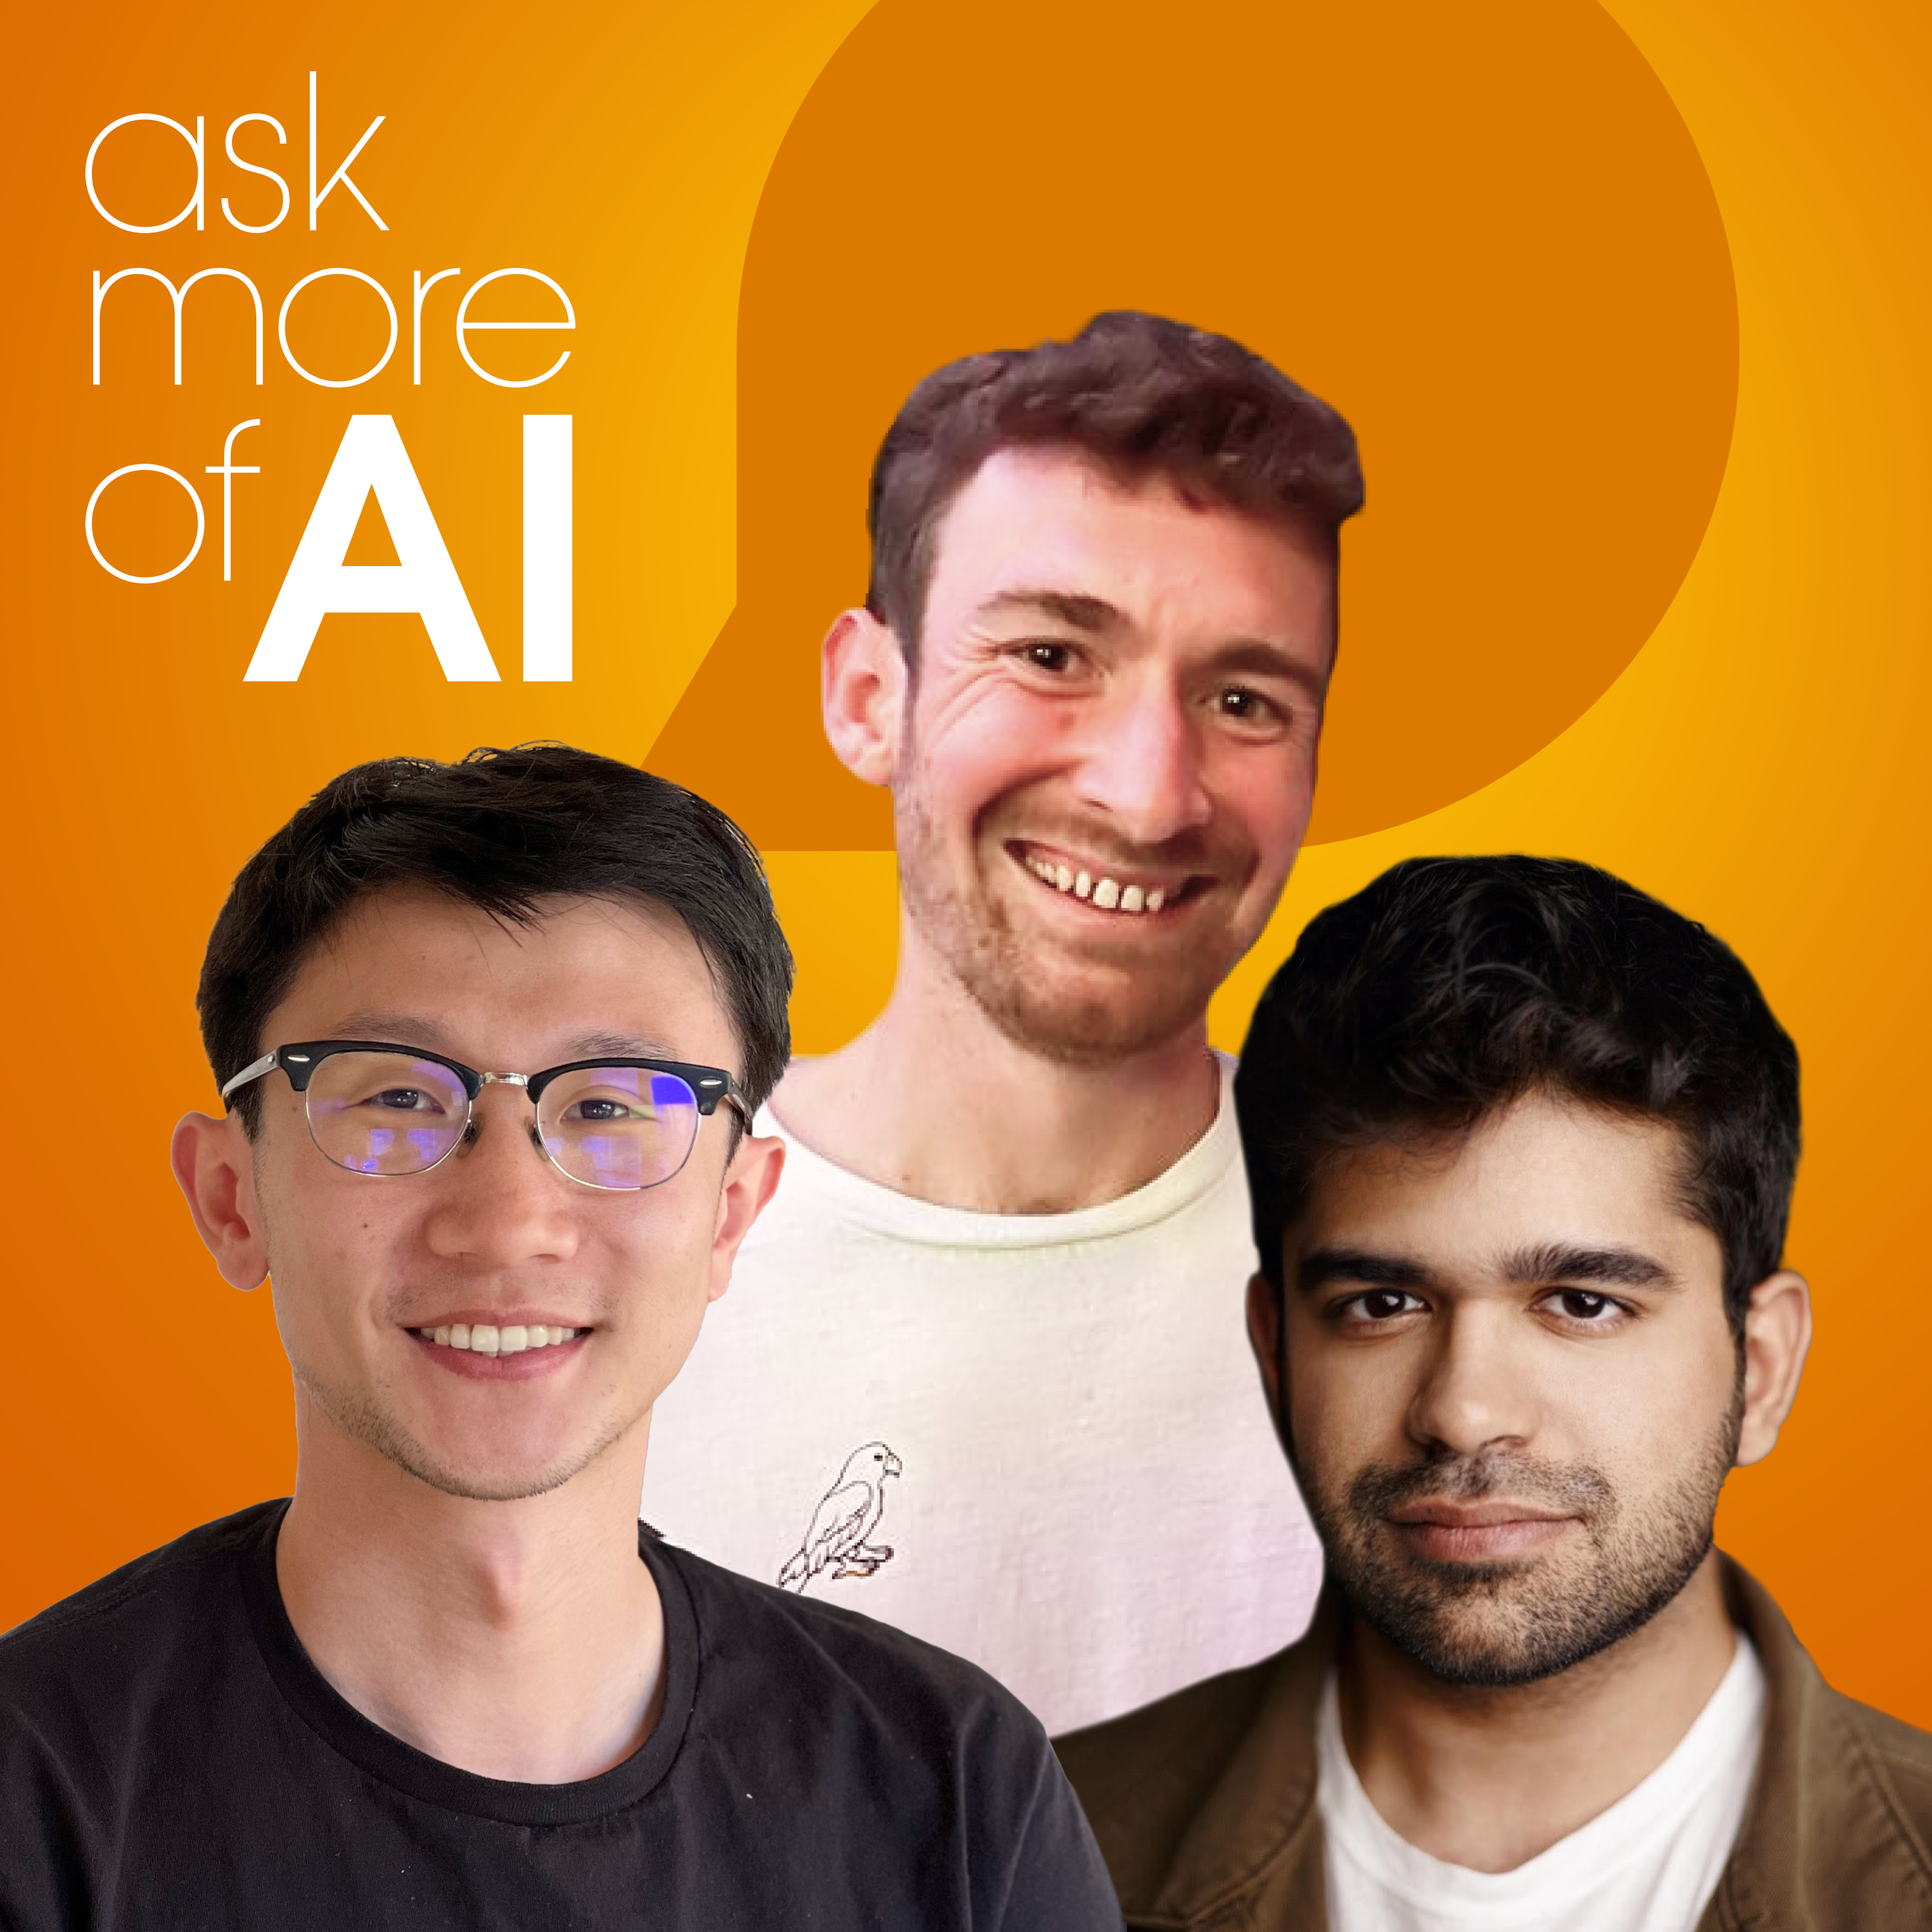 Workflows & Tooling to Create Trusted AI  | Ask More of AI with Clara Shih